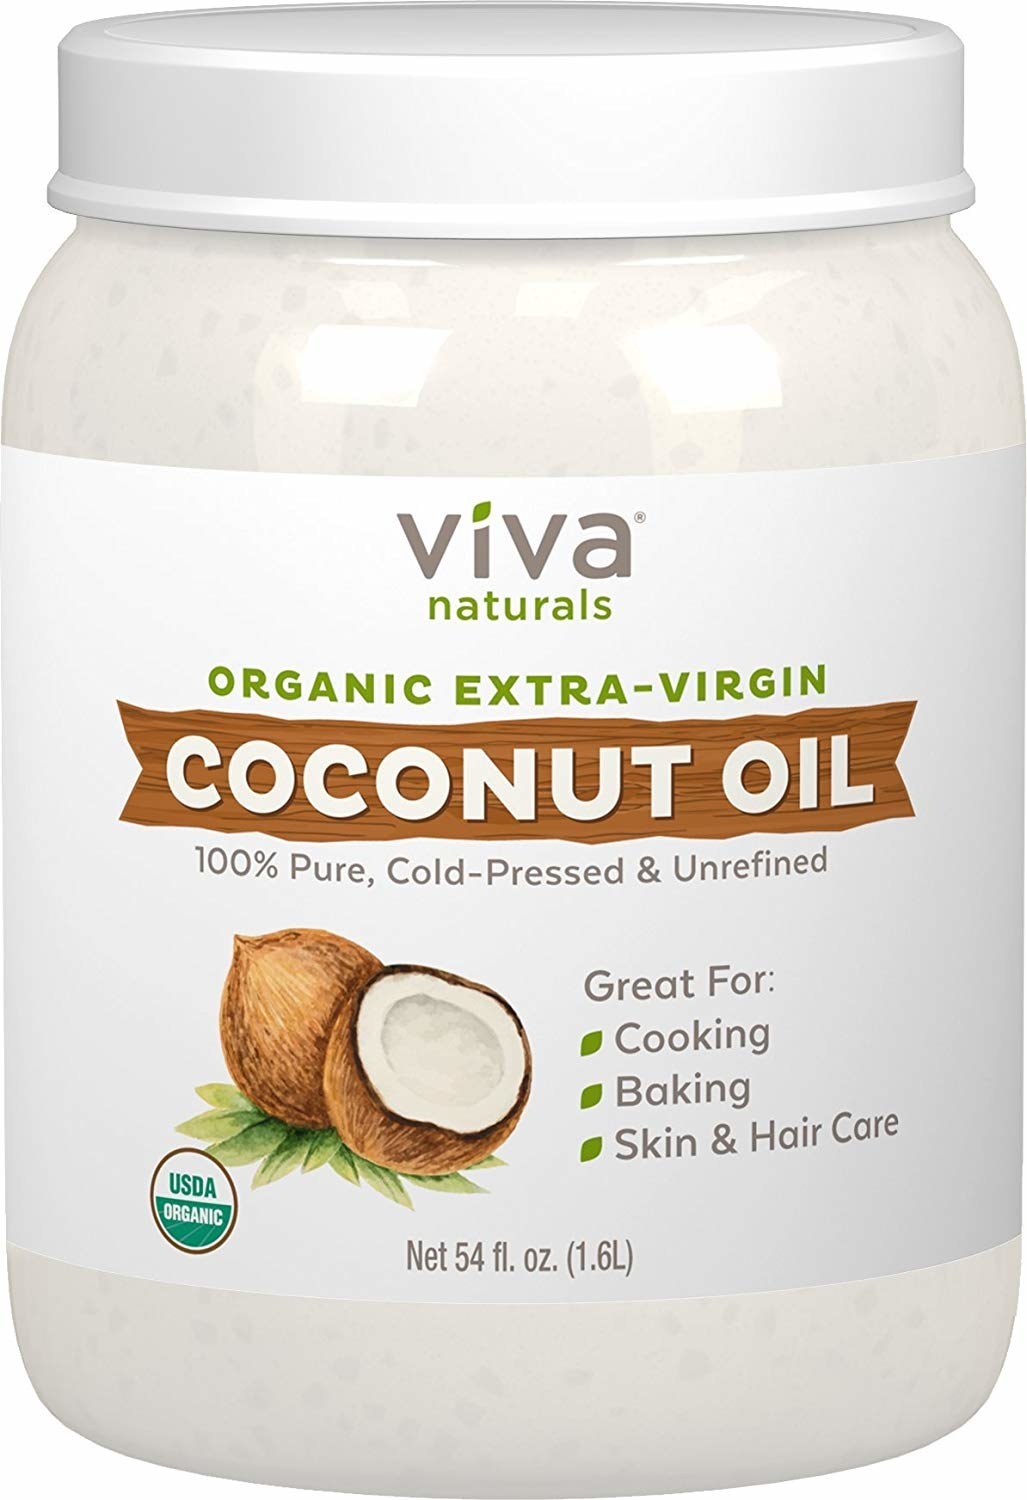 Container of coconut oil